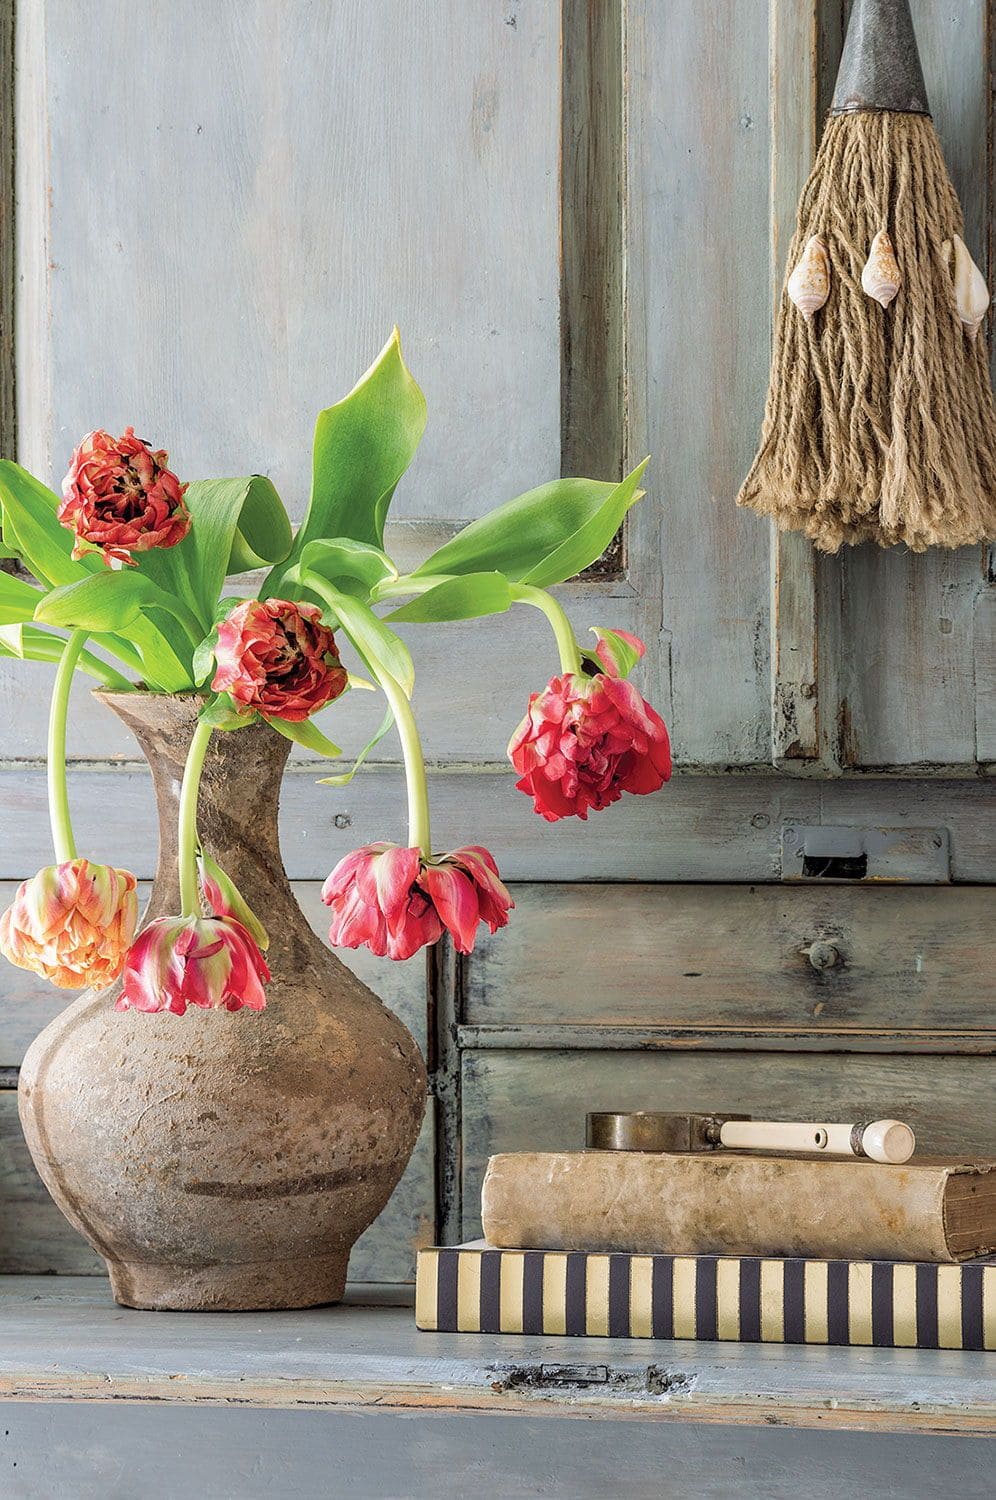 18 vintage styles to decorate your house with plants - 69